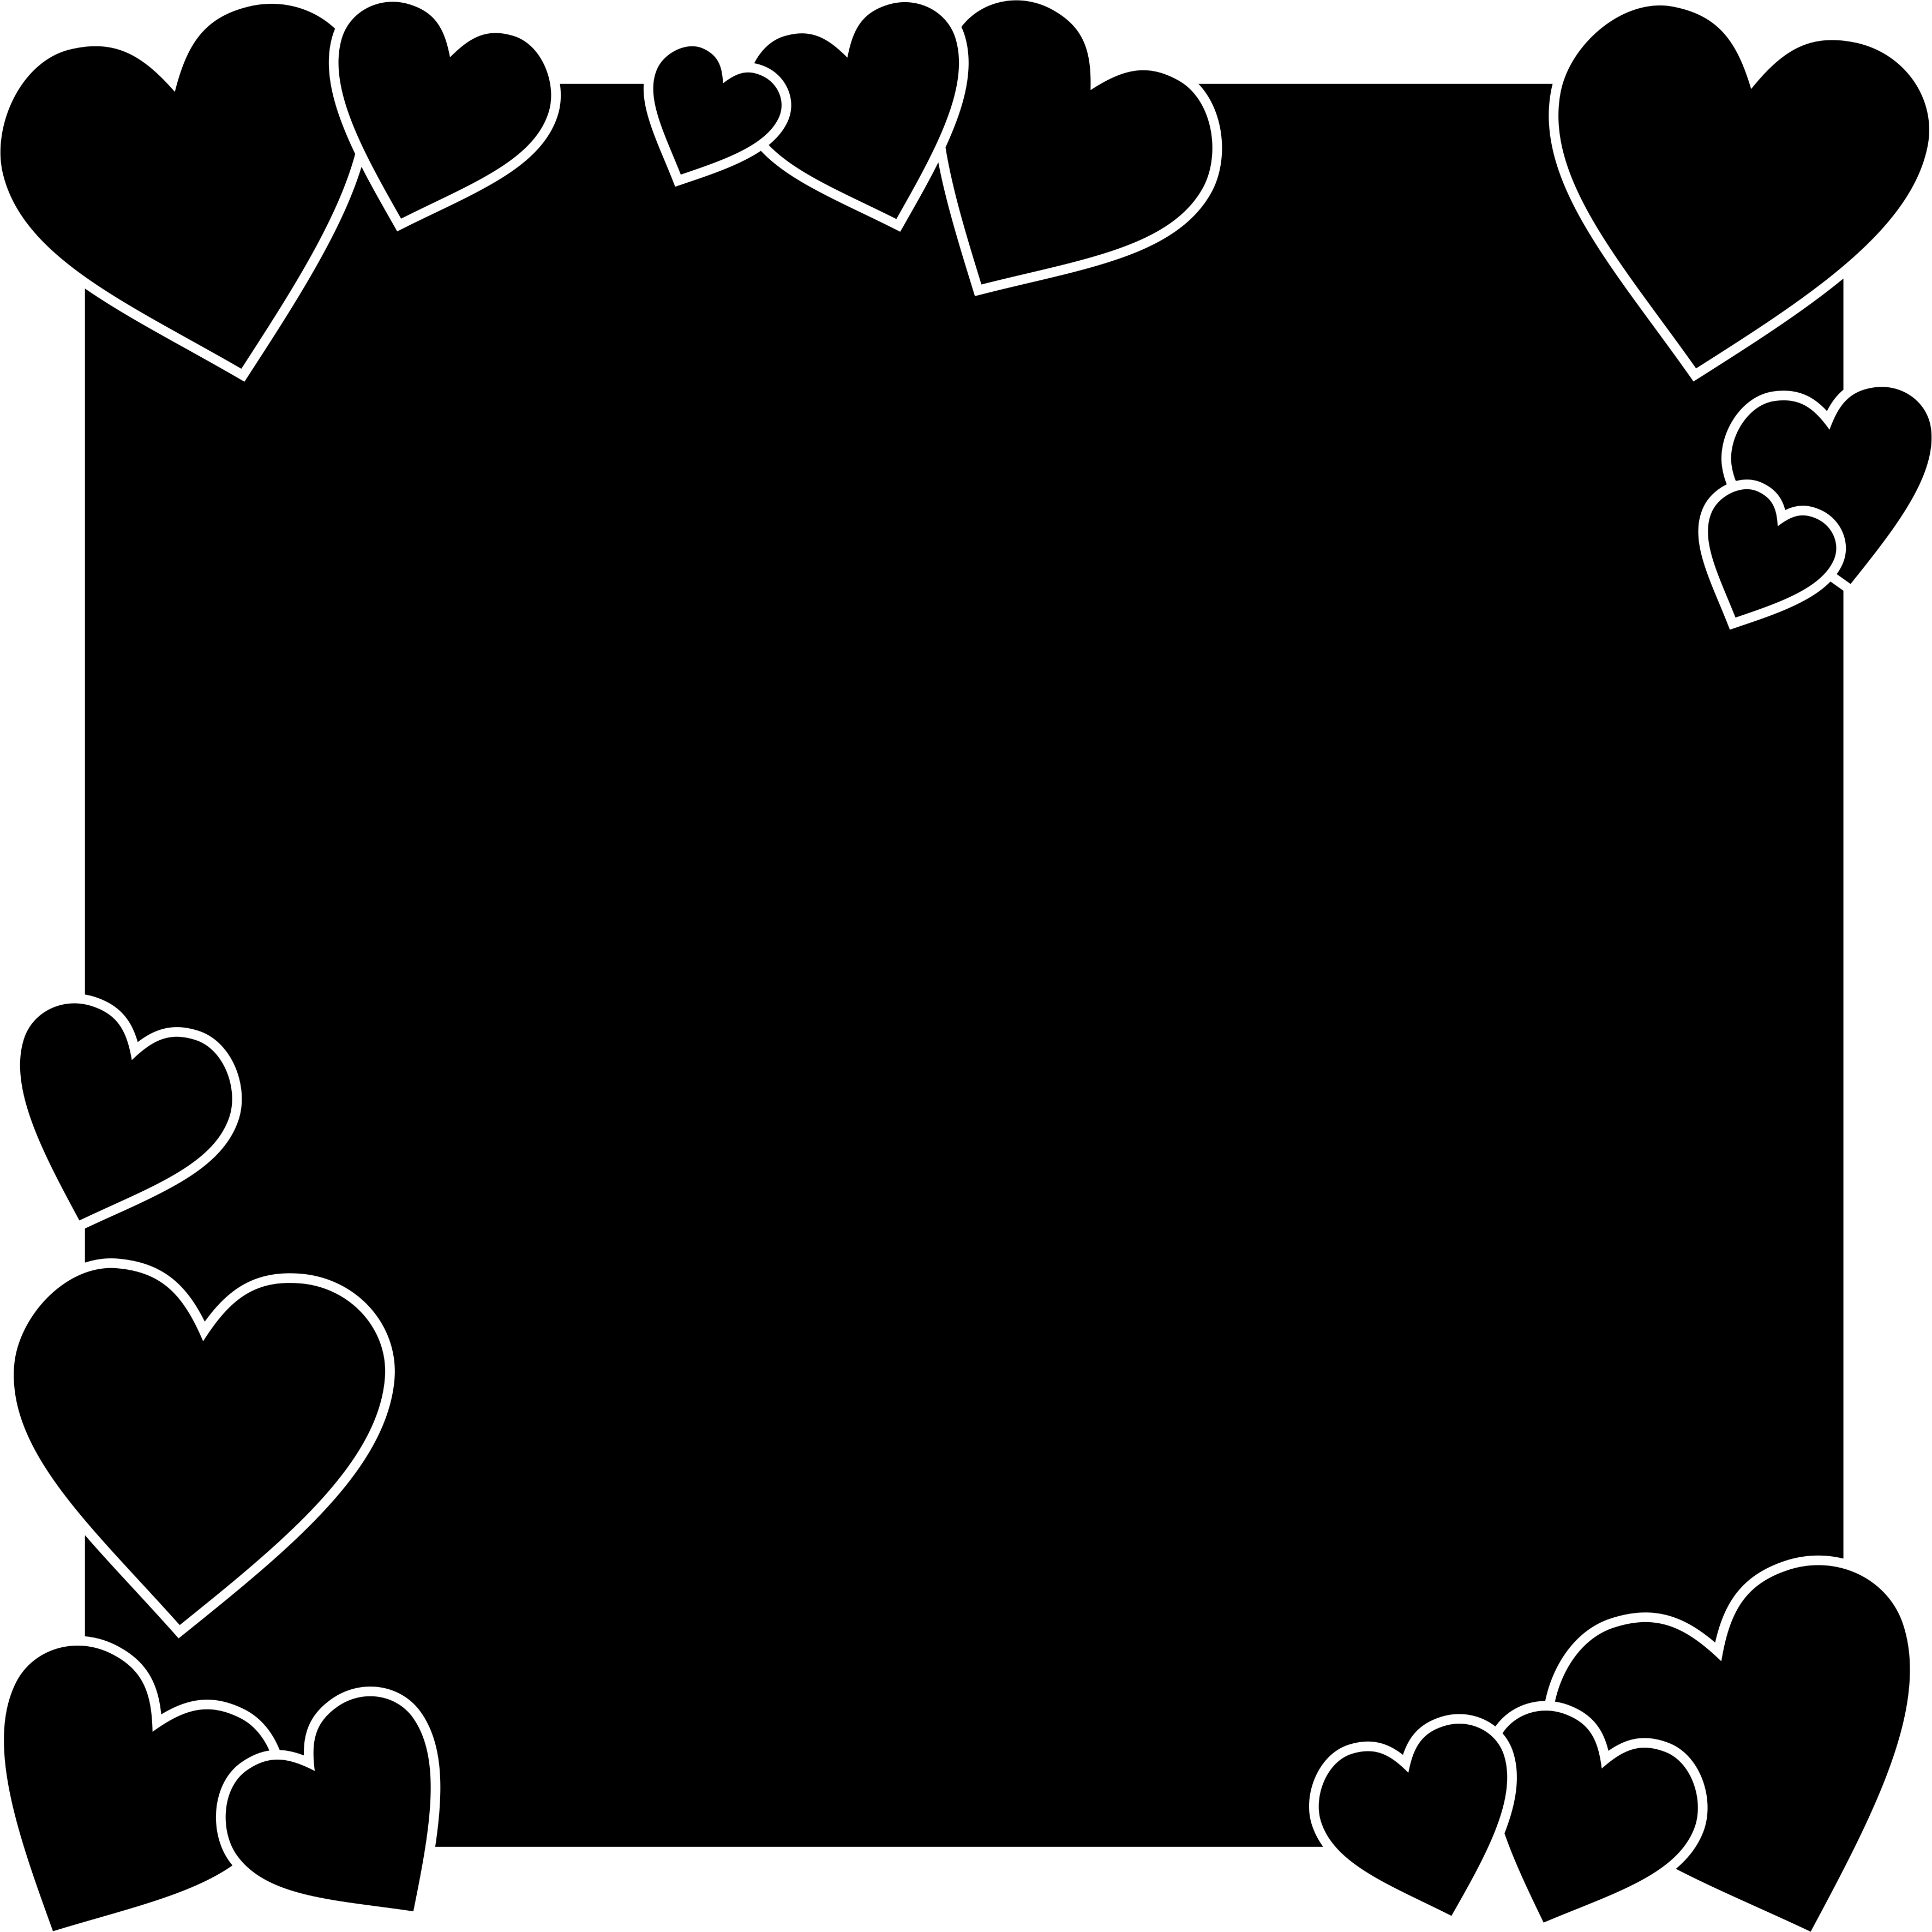 Stickers for Kids: Weekly Hearts 0